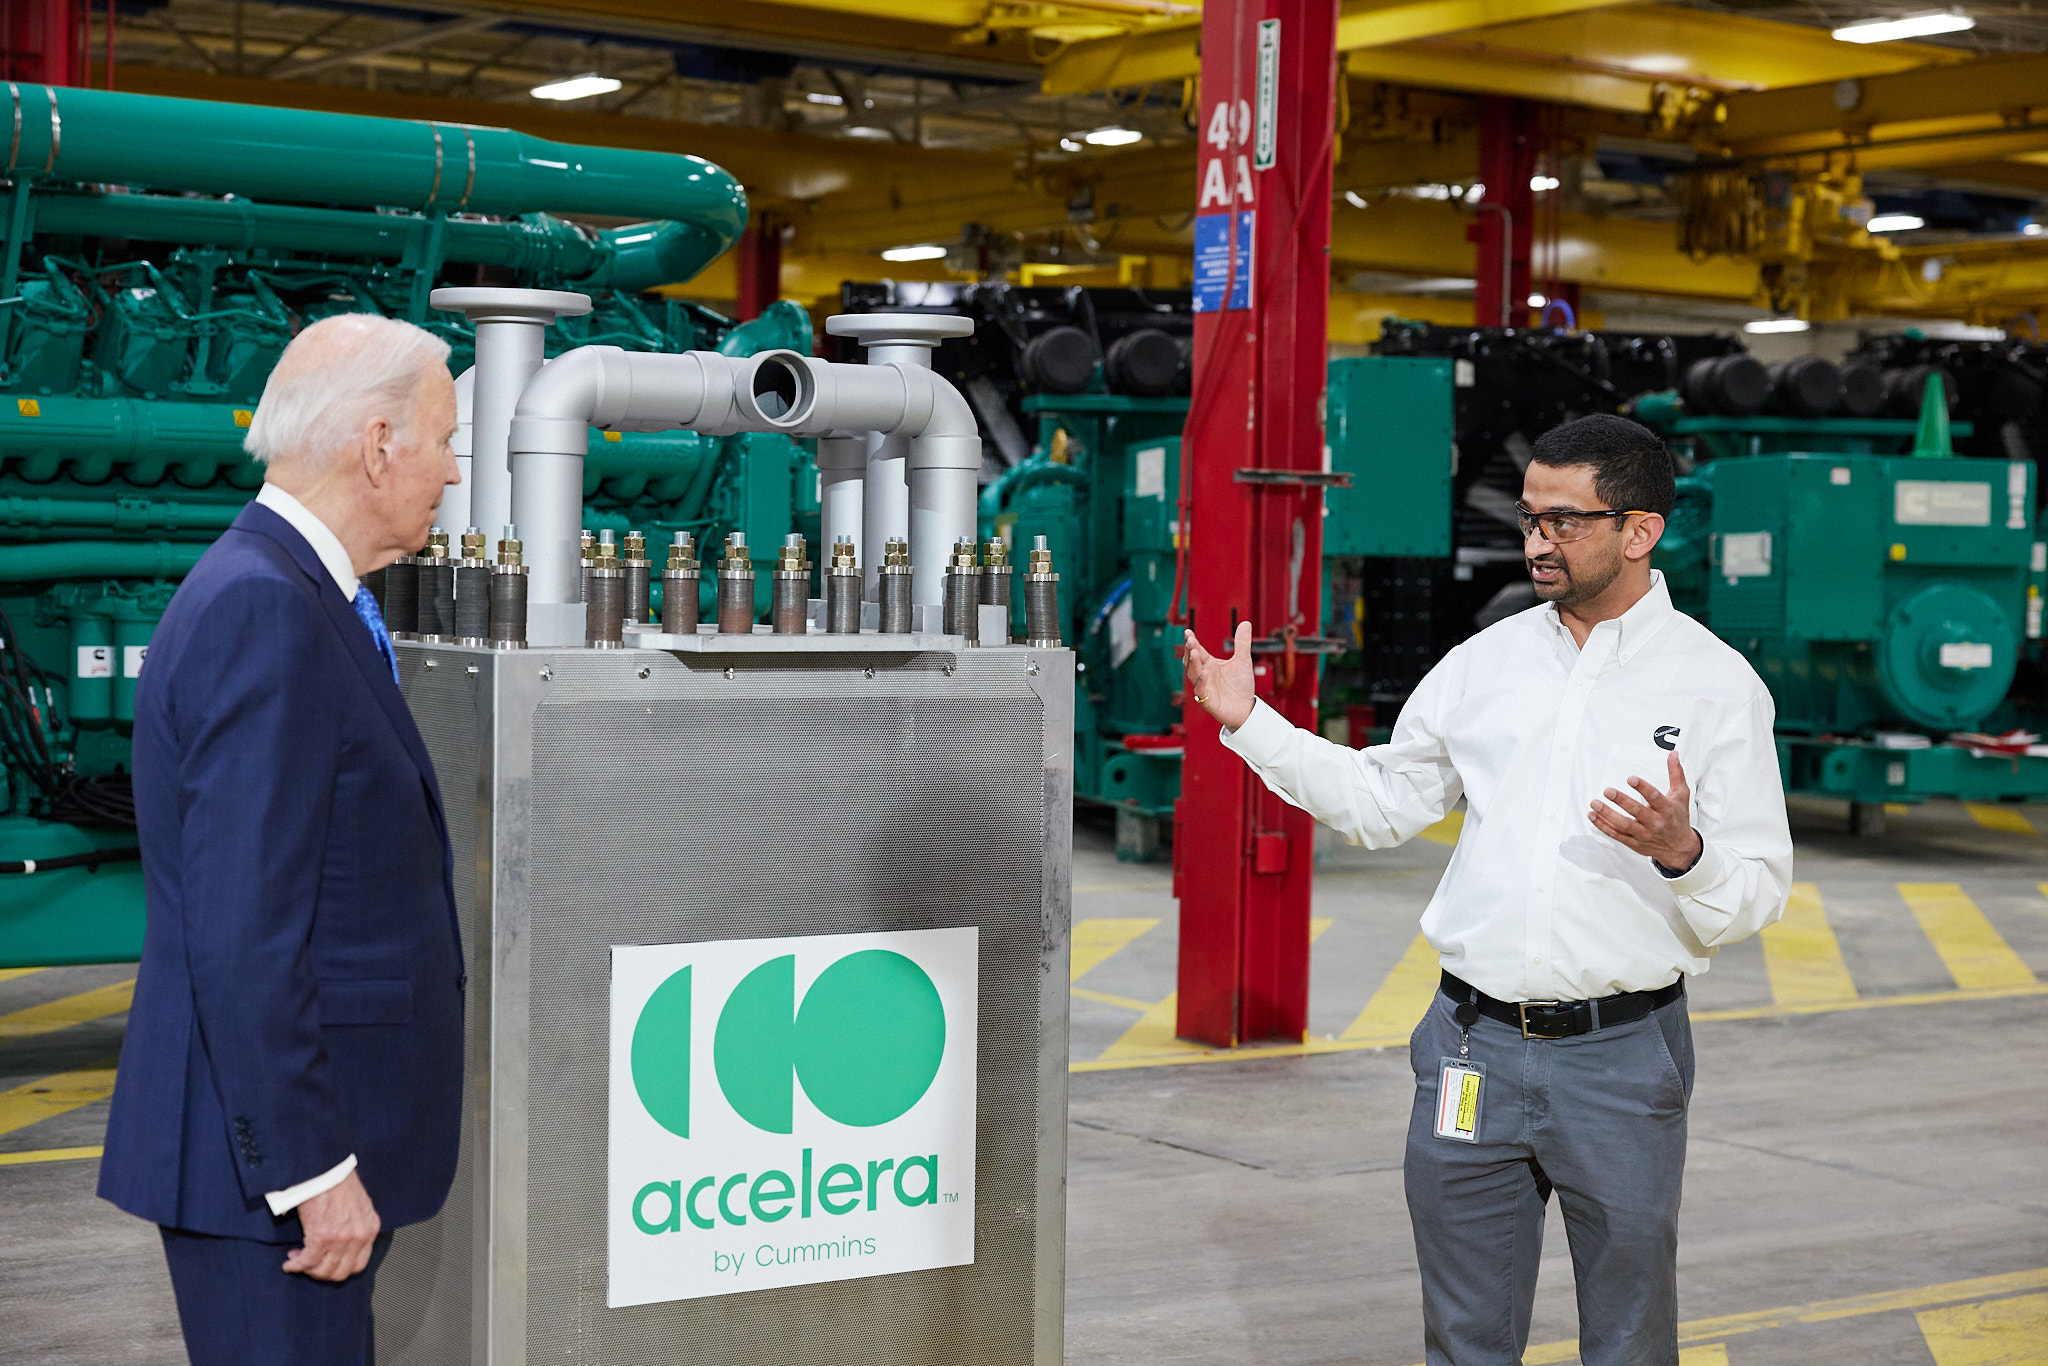 POTUS standing by an Accelera electrolyzer stack and conversing with an employee